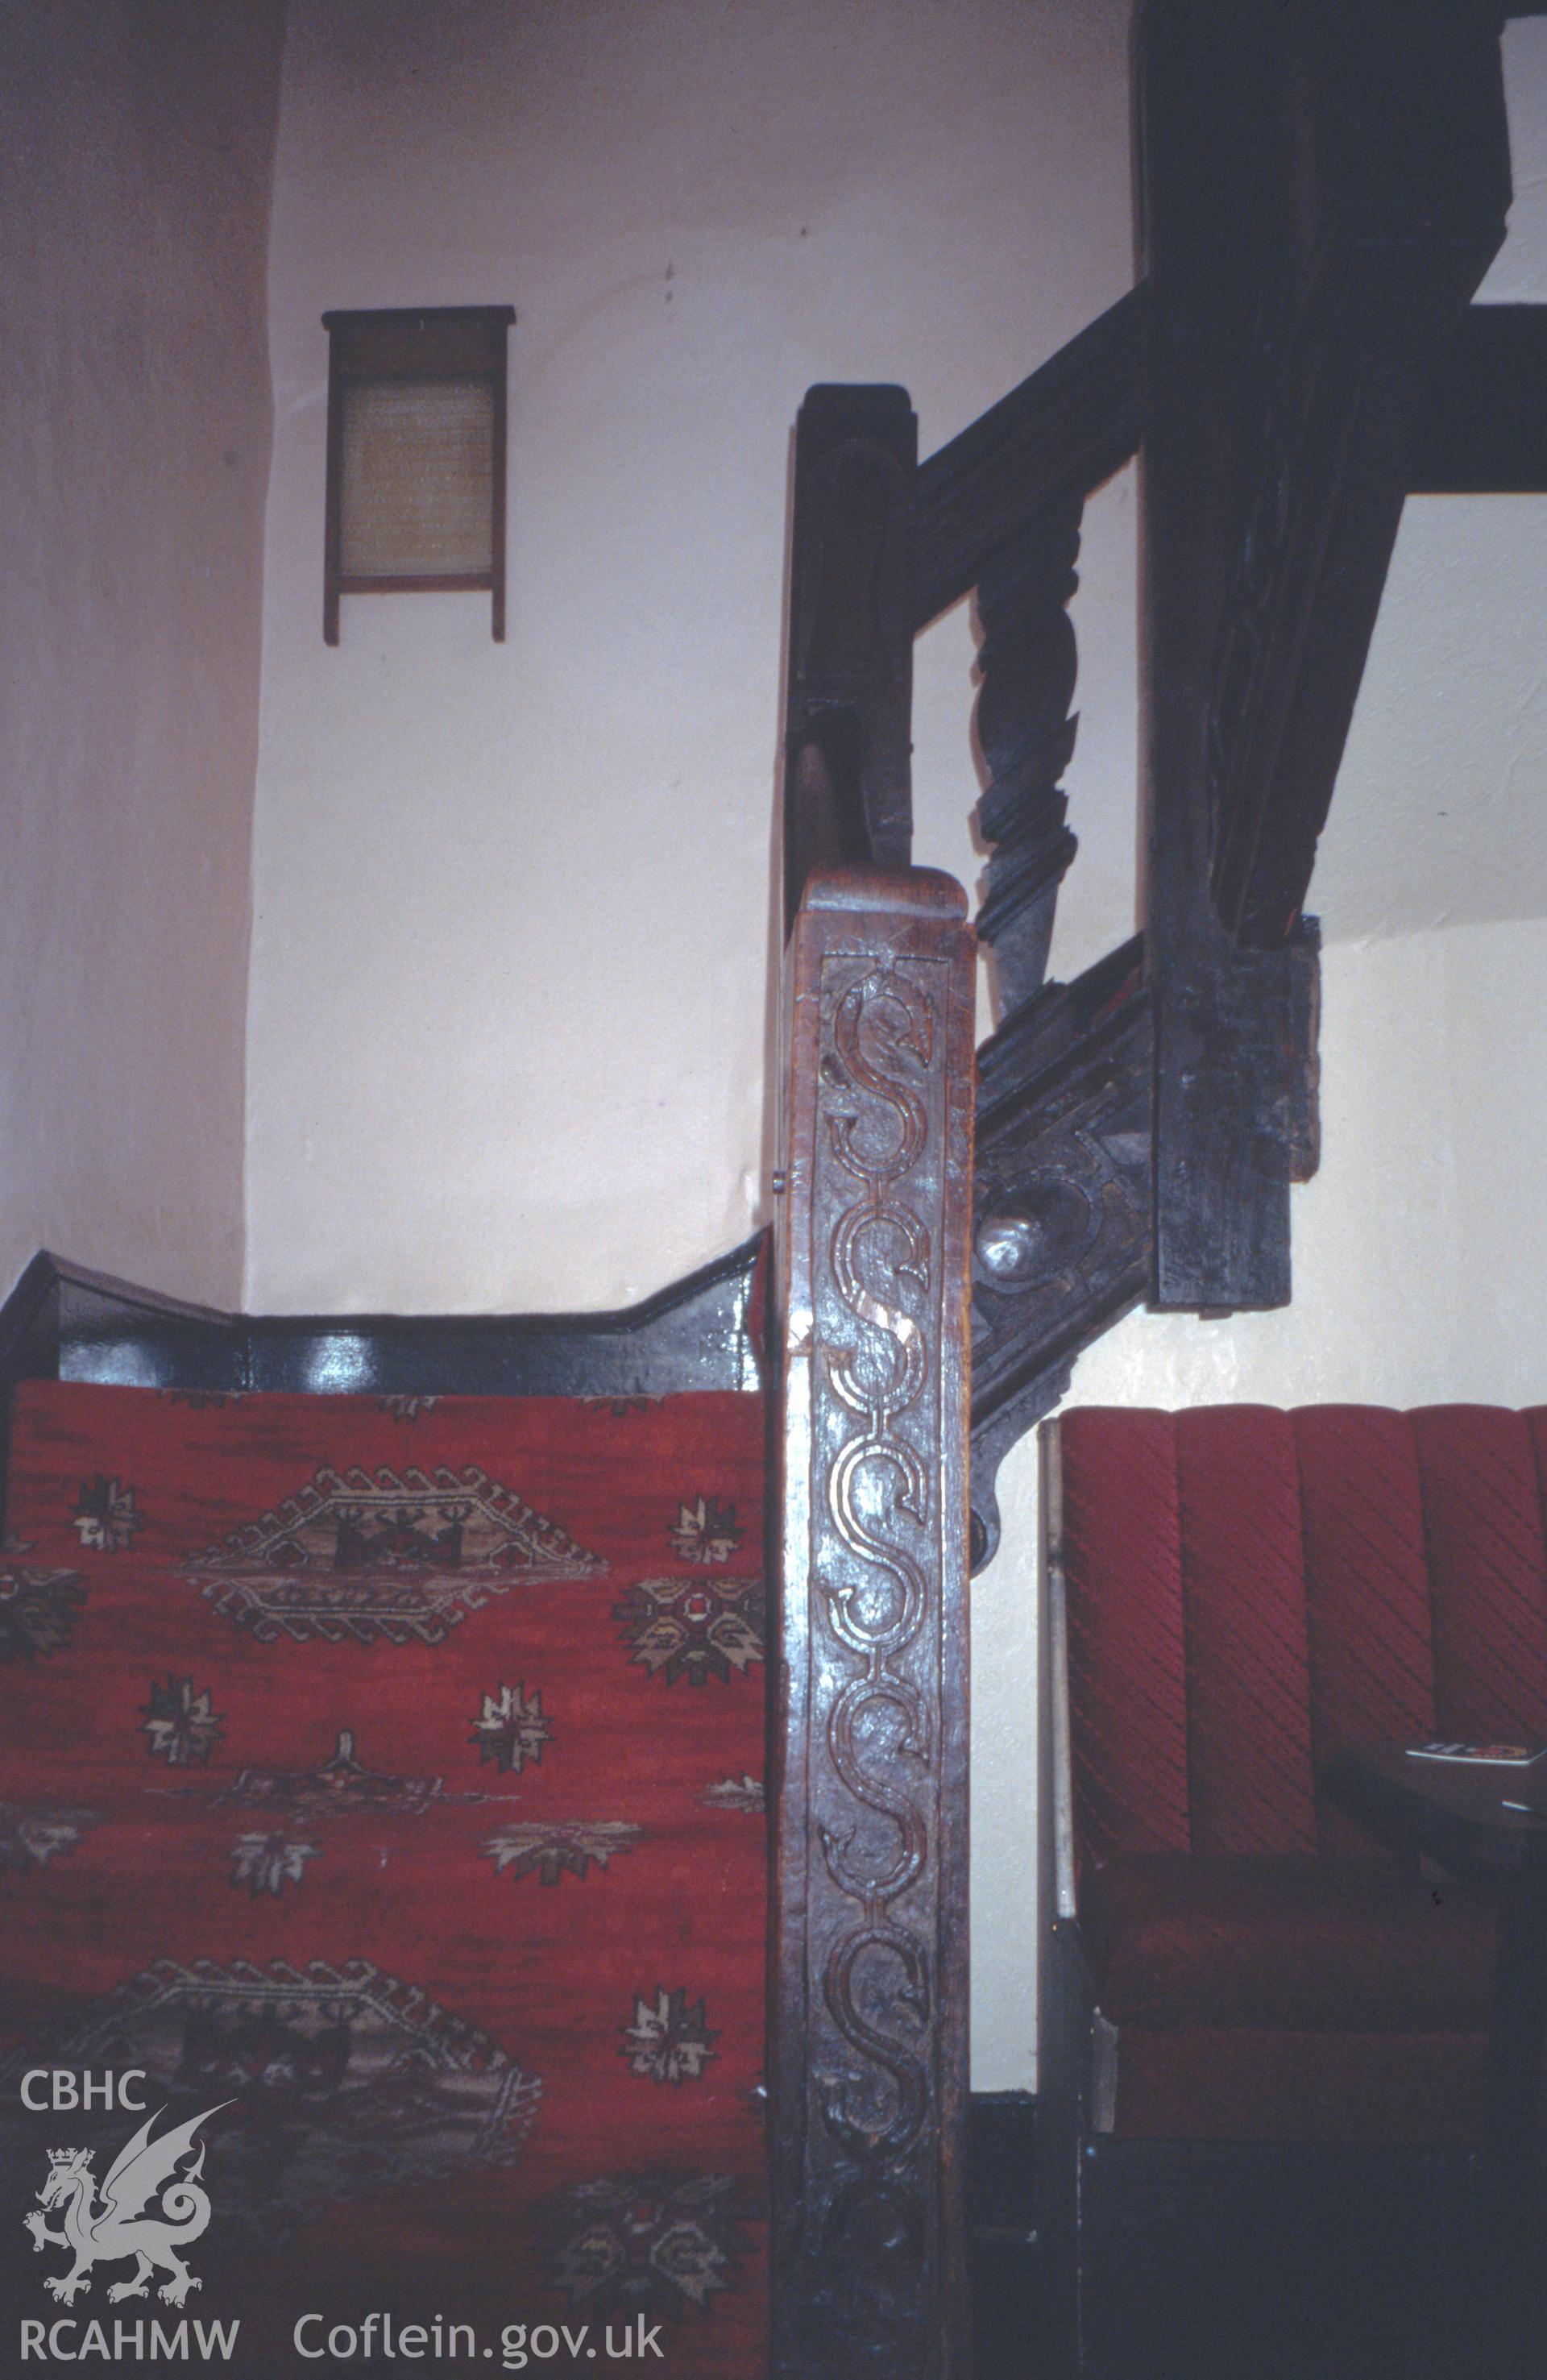 Interior view showing early seventeenth-century stair.